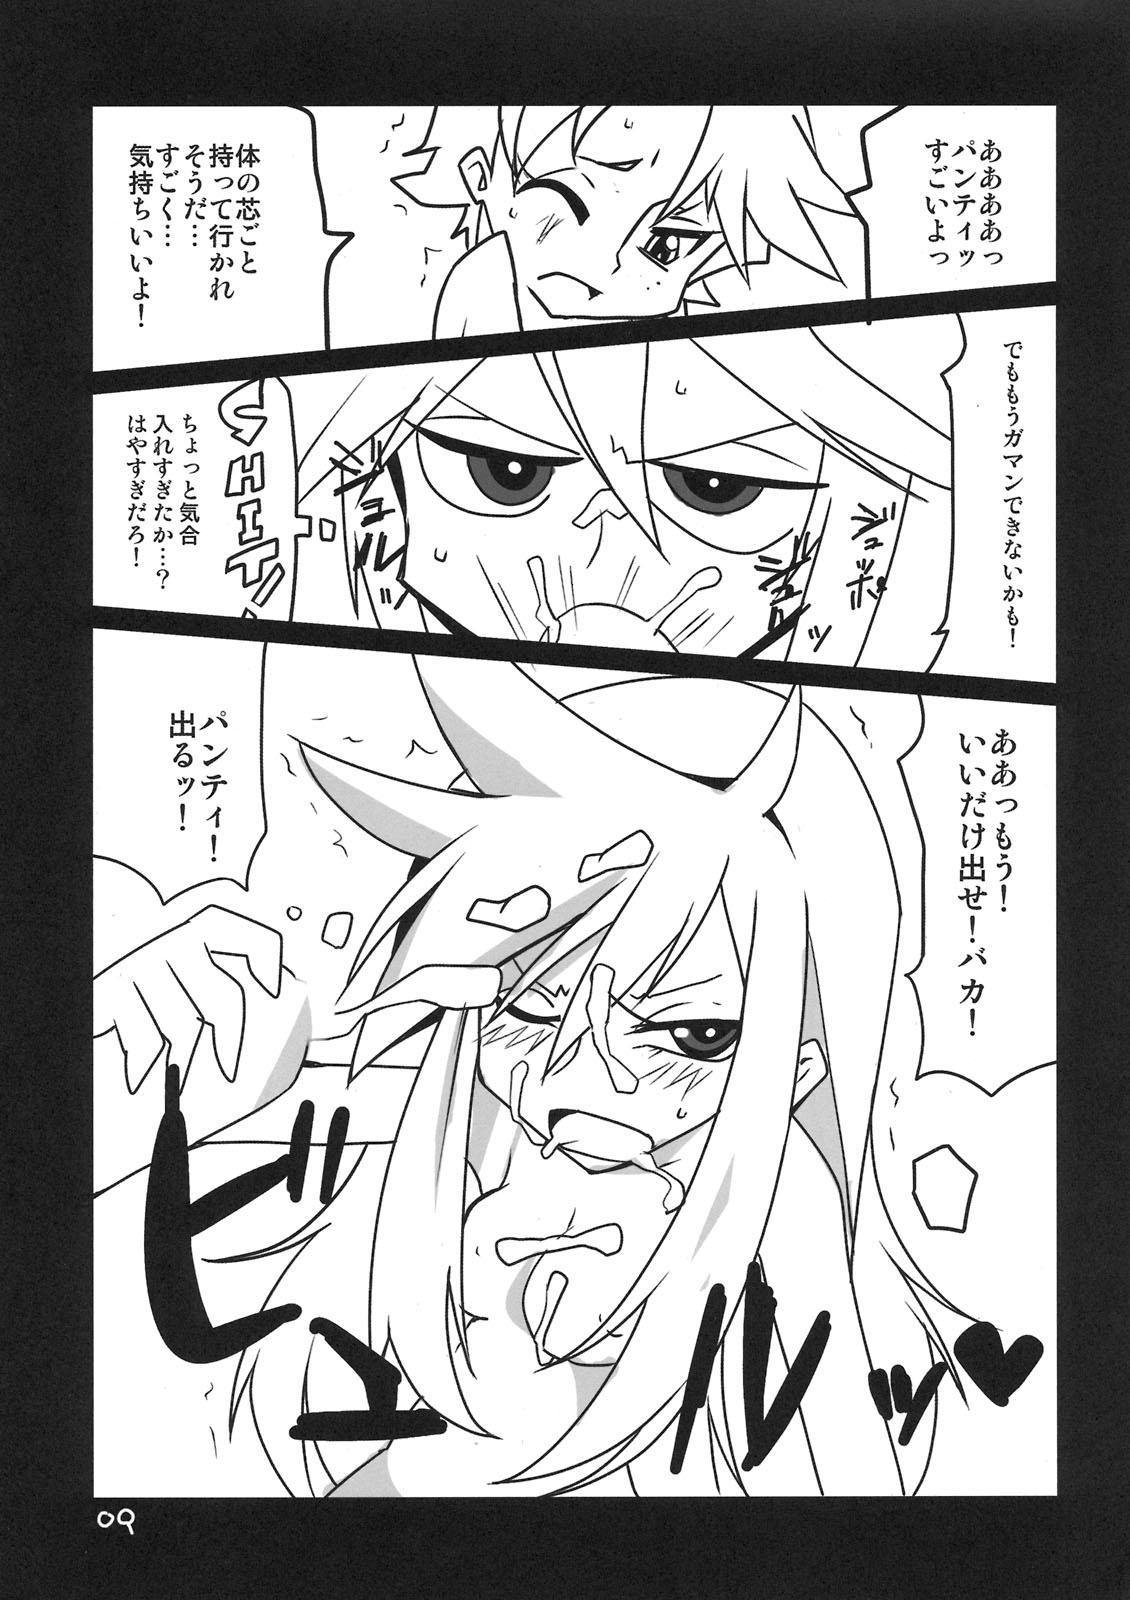 Missionary Porn Panty & Stocking Portable - Panty and stocking with garterbelt Sucking - Page 9